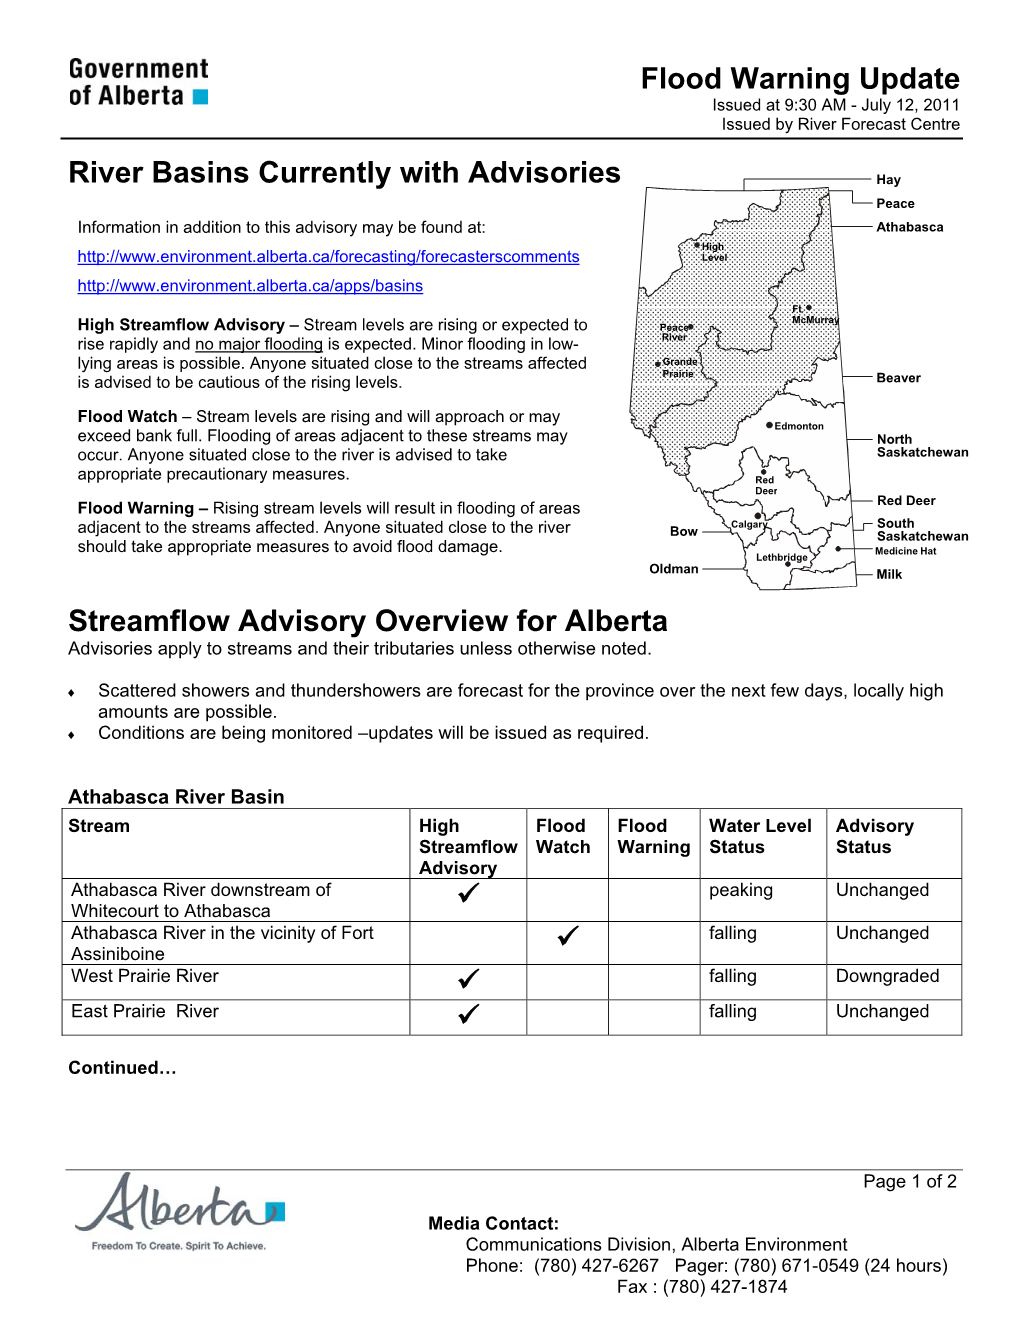 Flood Warning Update River Basins Currently with Advisories